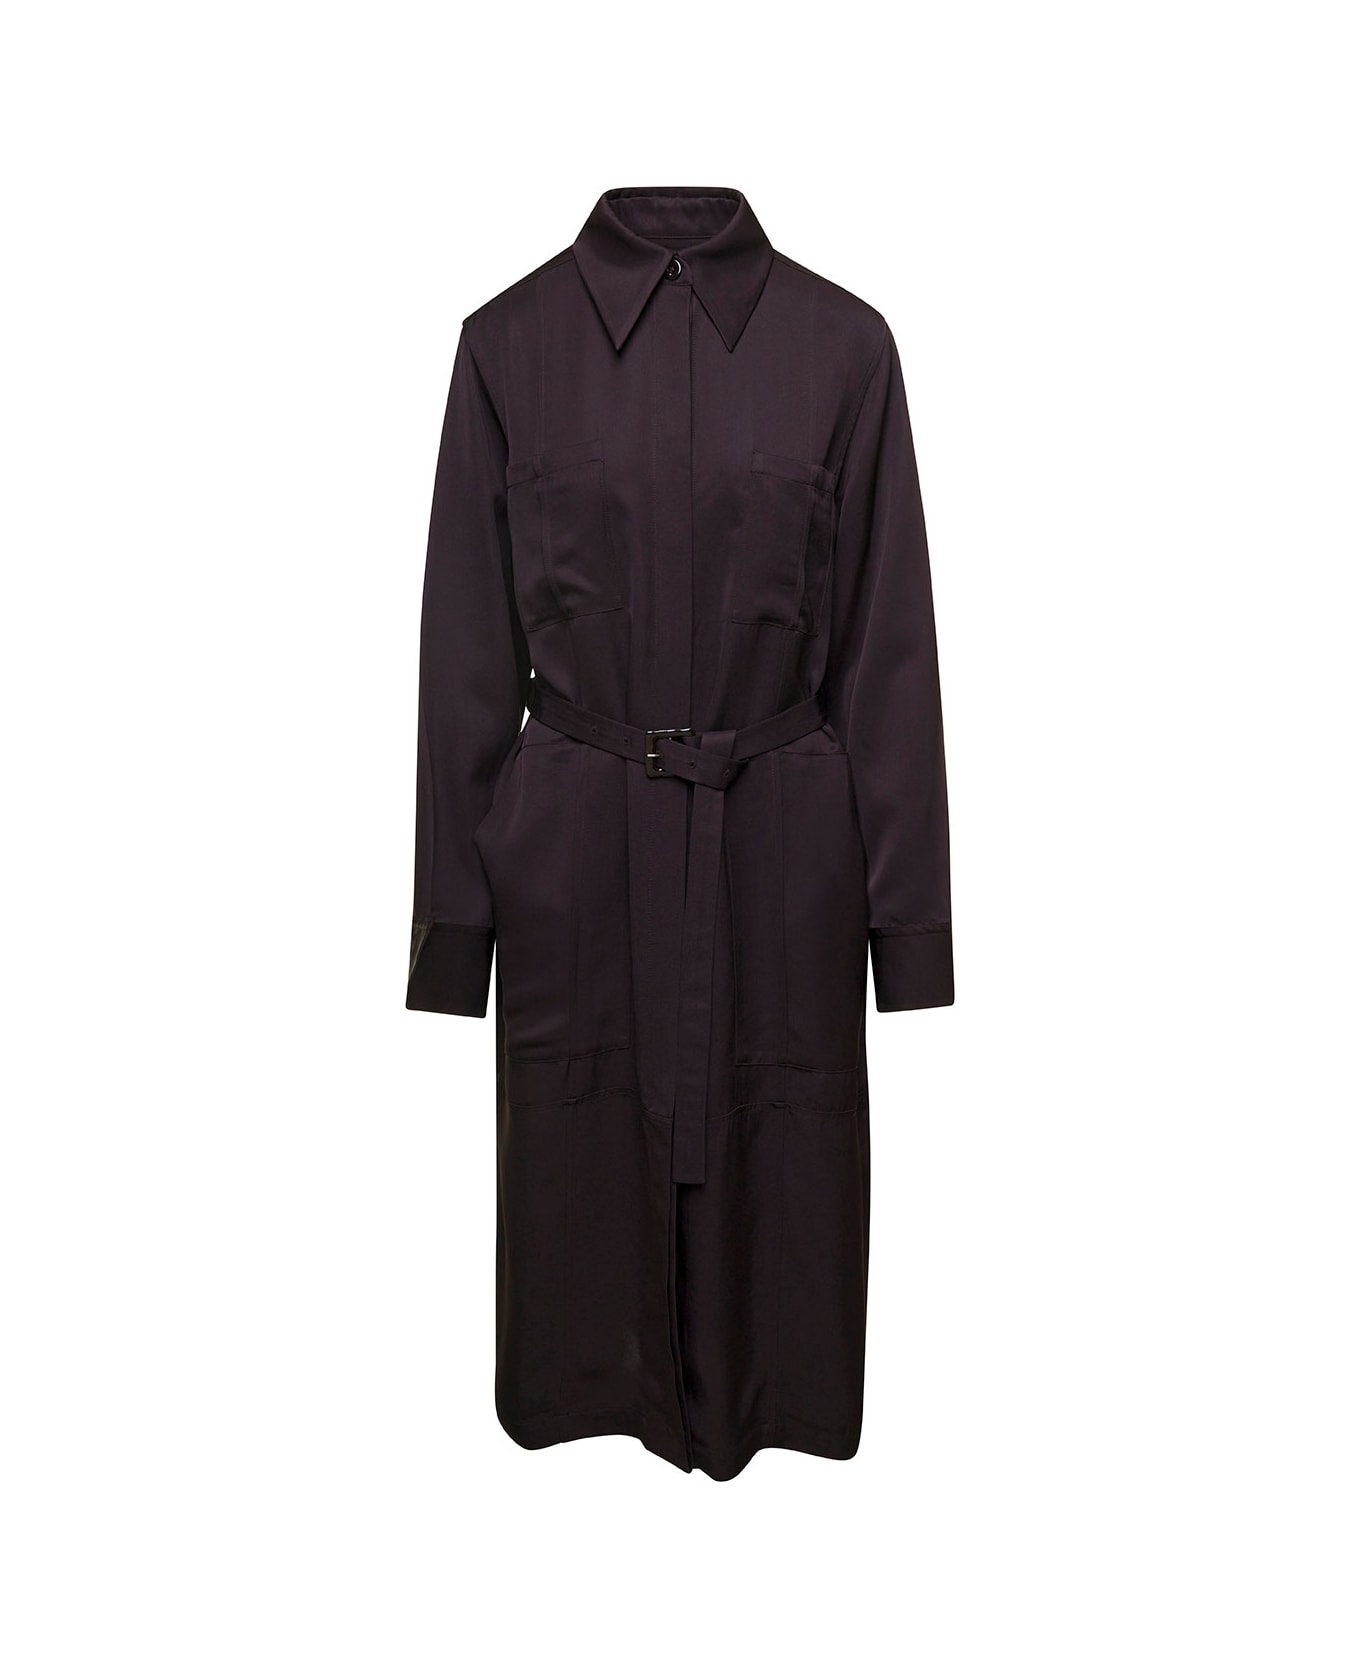 Jil Sander Brown Belted Coat With Classic Collar In Viscose Twill Woman - Brown コート